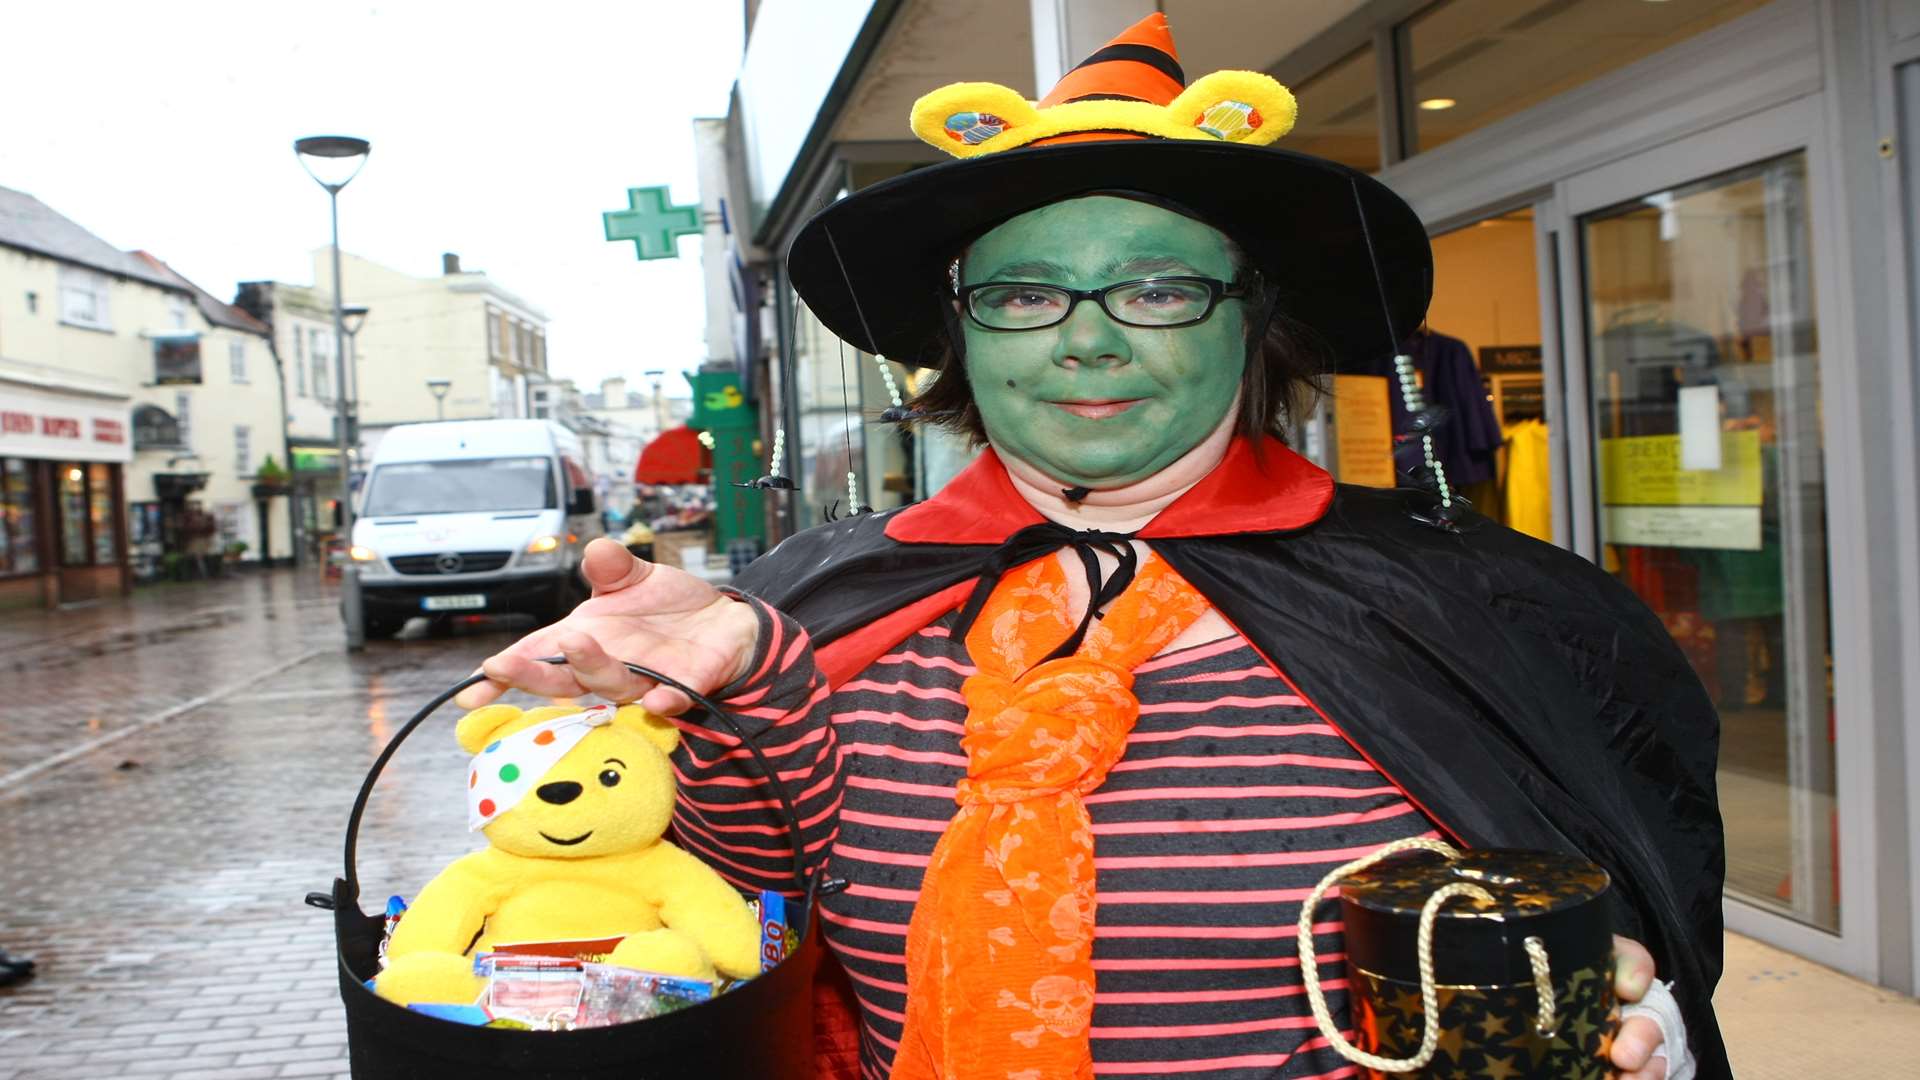 Gail King raised more than £700 in a street collection for Children in Need